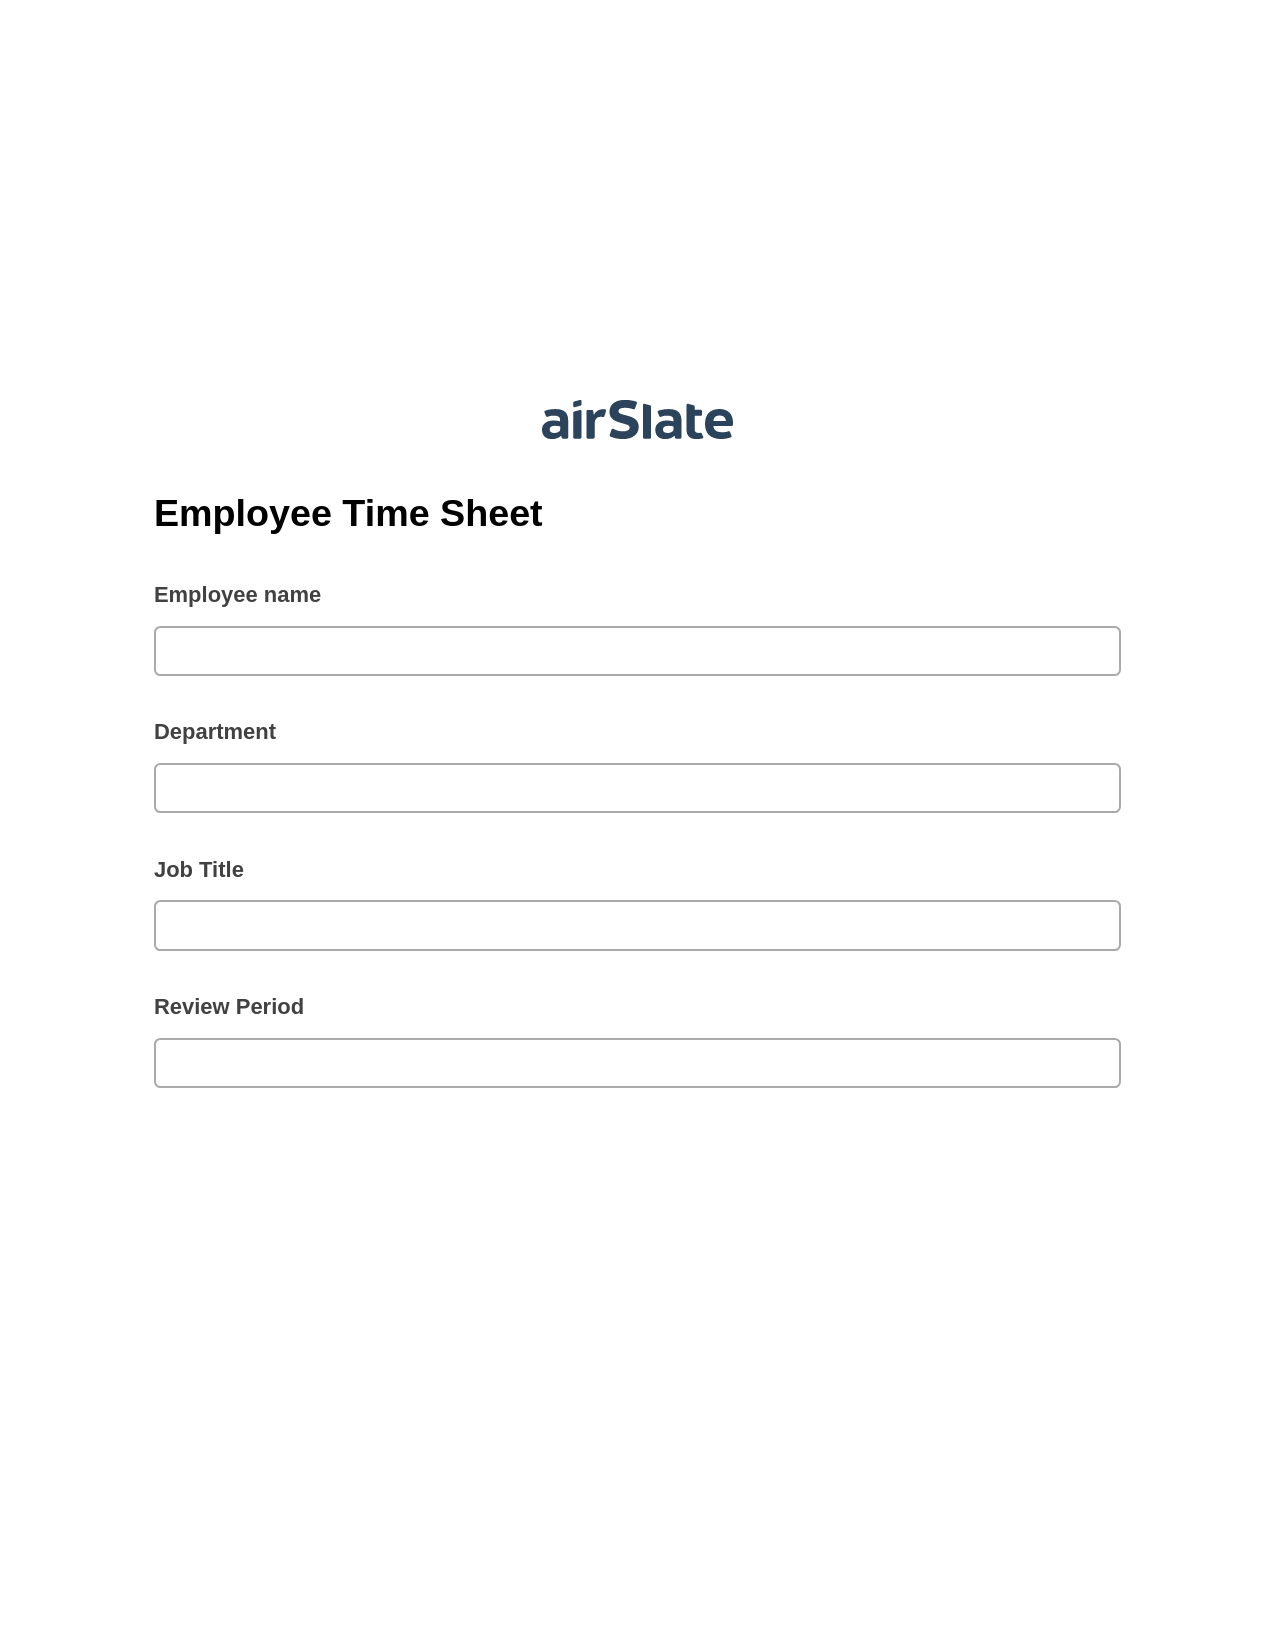 Employee Time Sheet Pre-fill Dropdowns from Smartsheet Bot, Create slate addon, Export to Excel 365 Bot